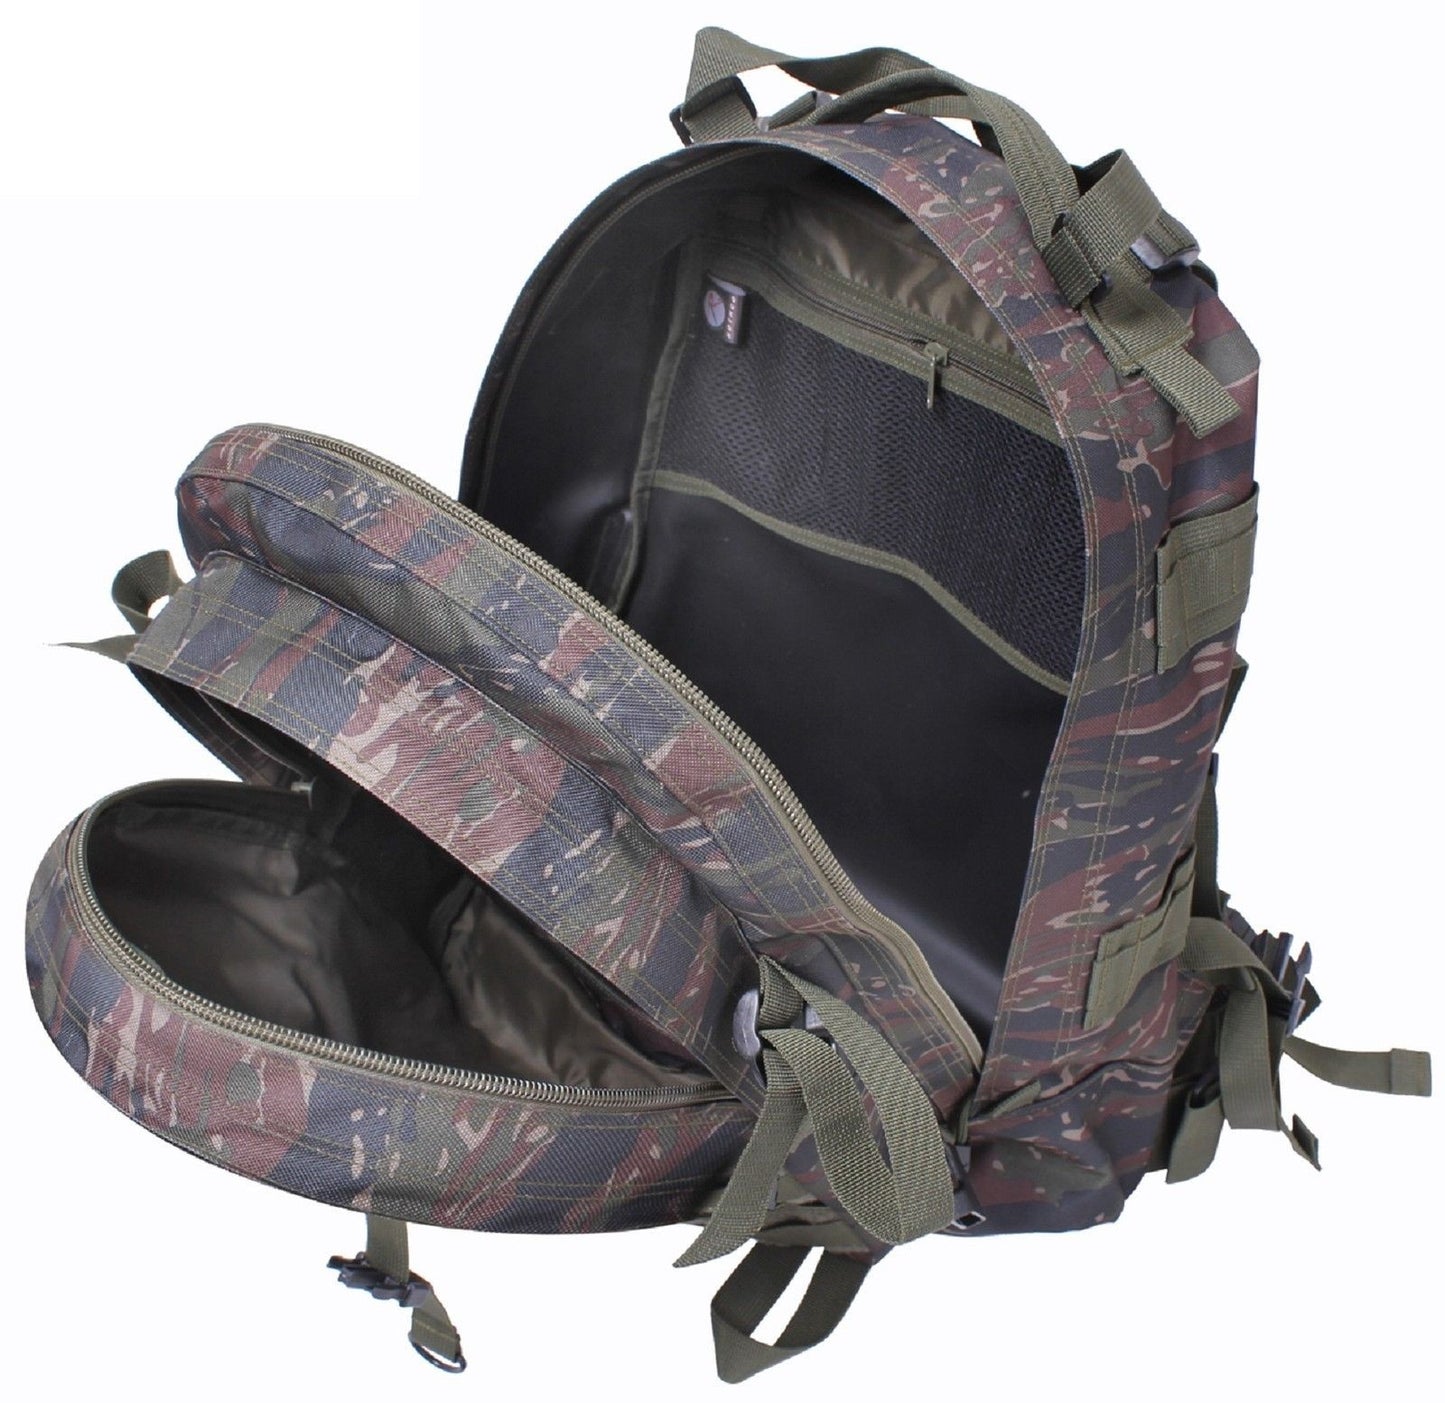 Woodland Camouflage Large Transport Pack Backpack - Camo 19" MOLLE Tactical Bag